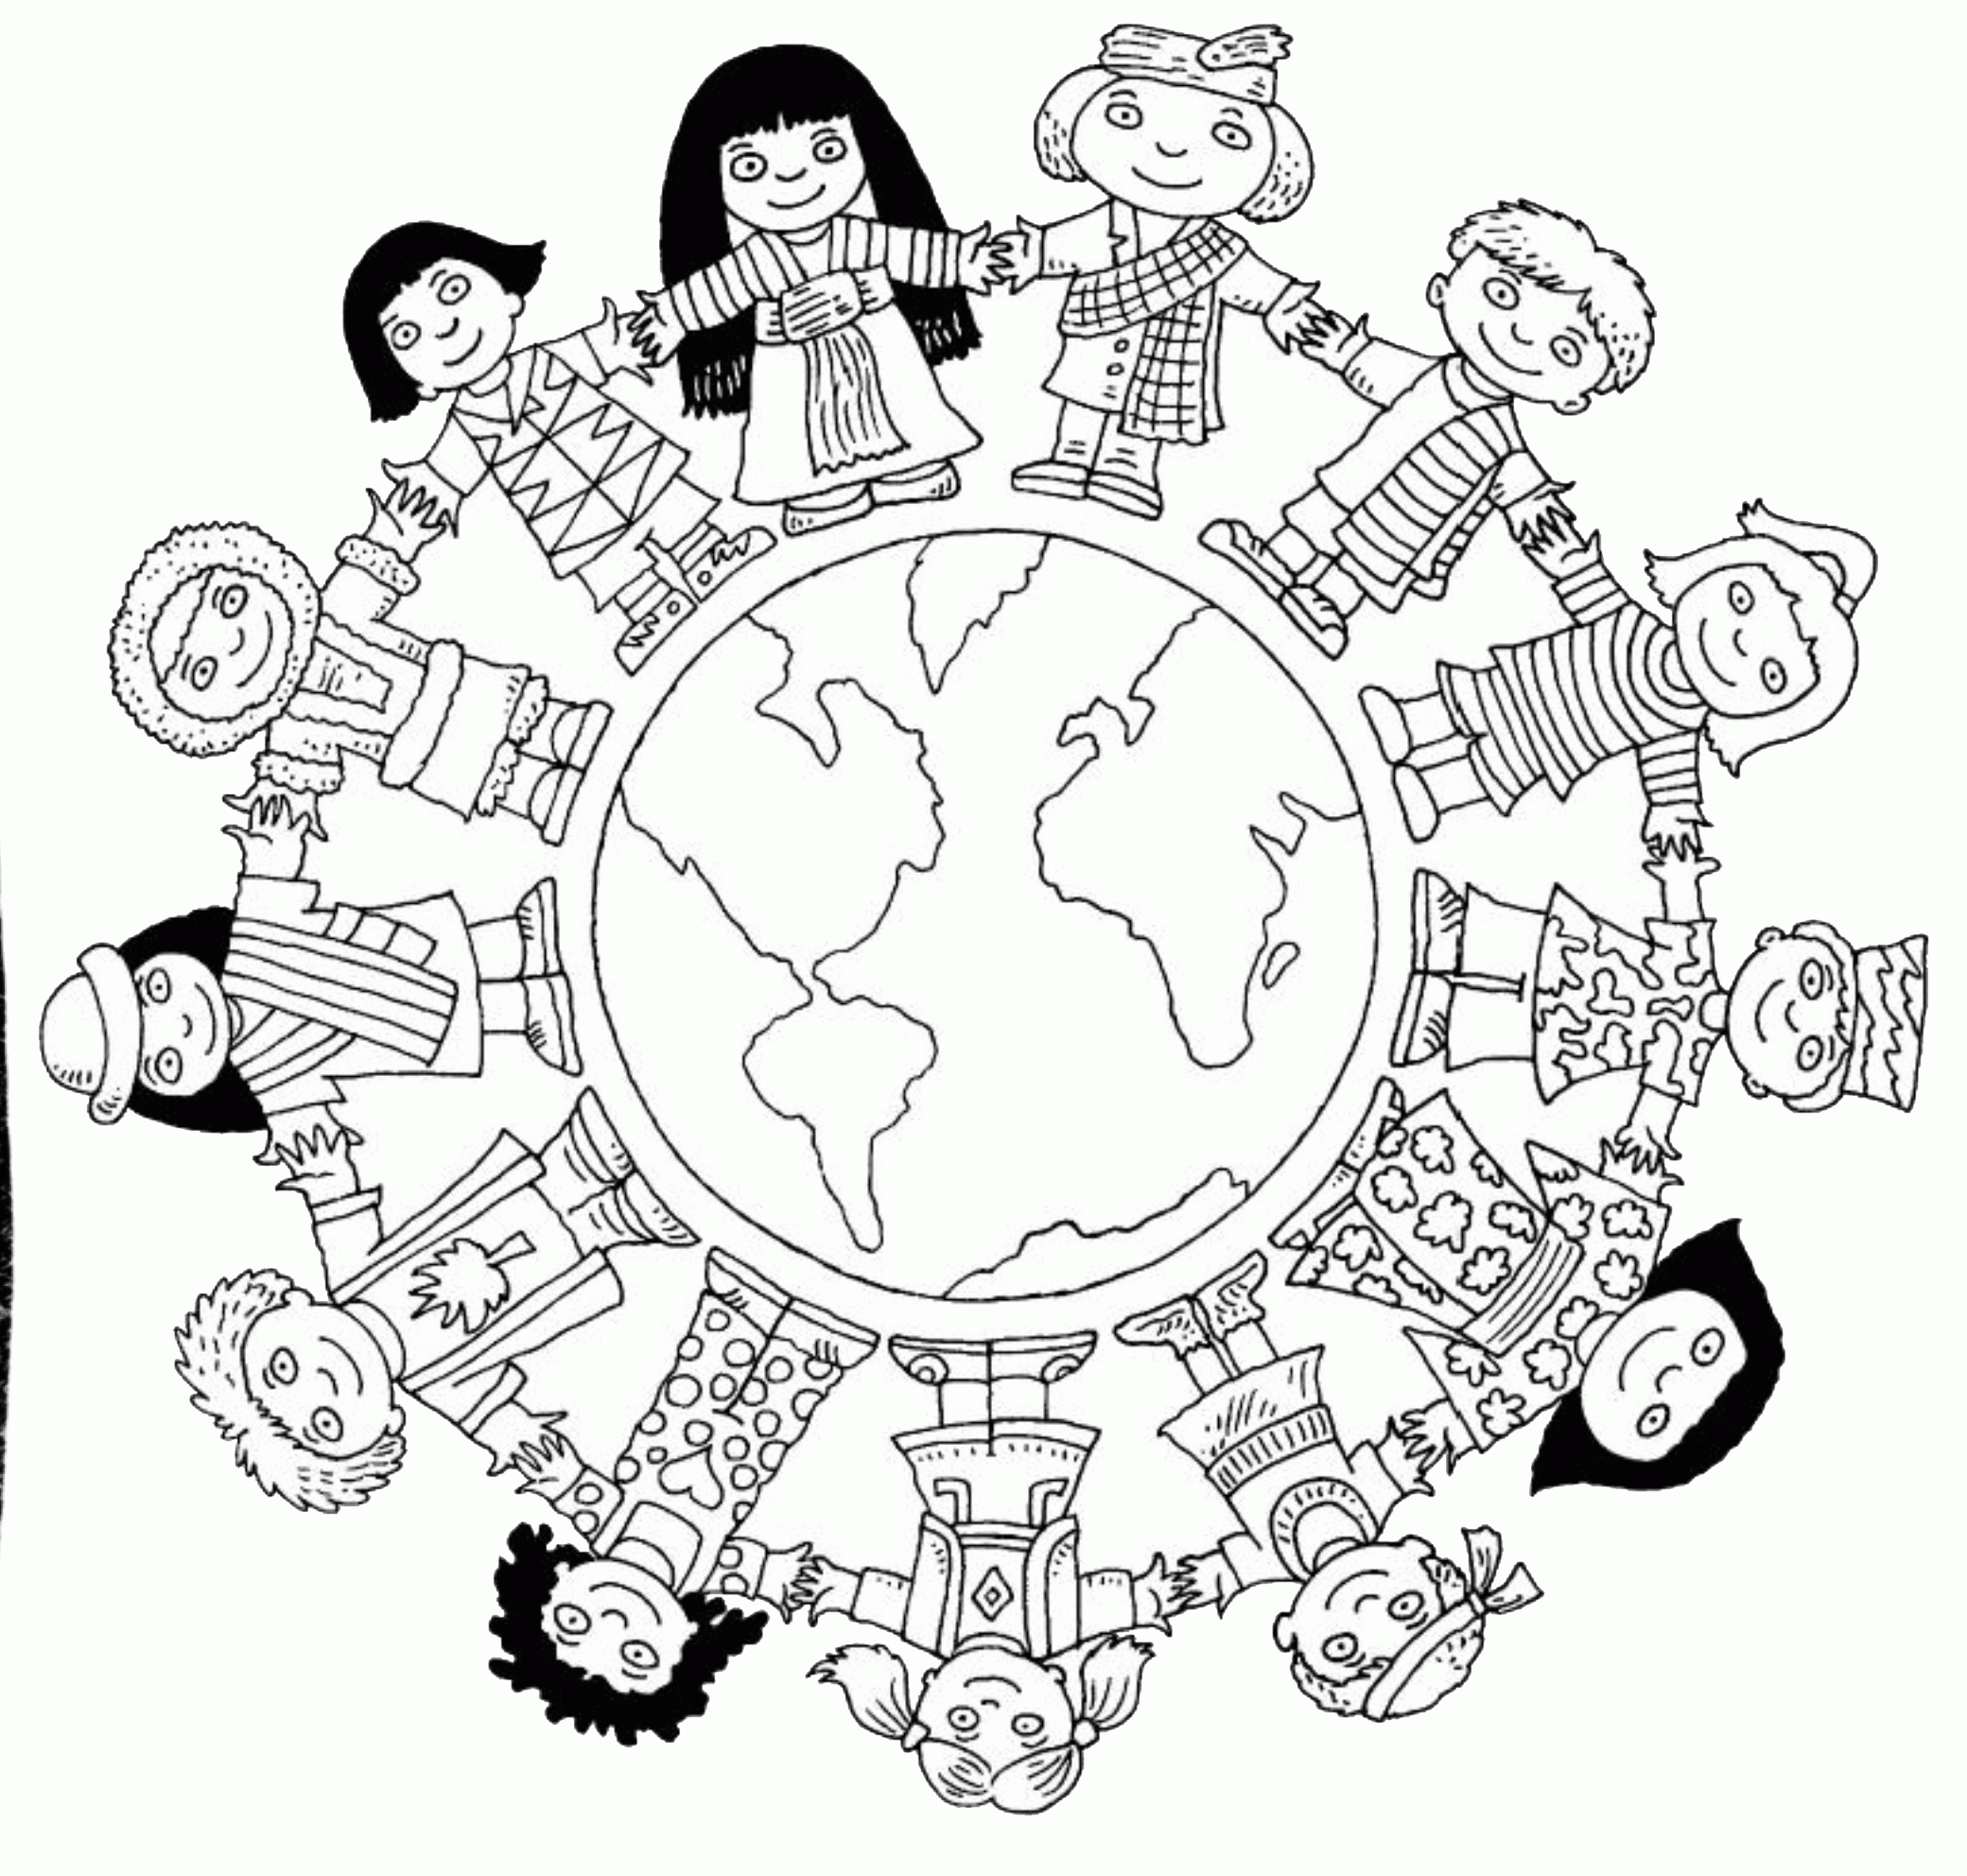 Children Of The World Coloring Page - Coloring Home